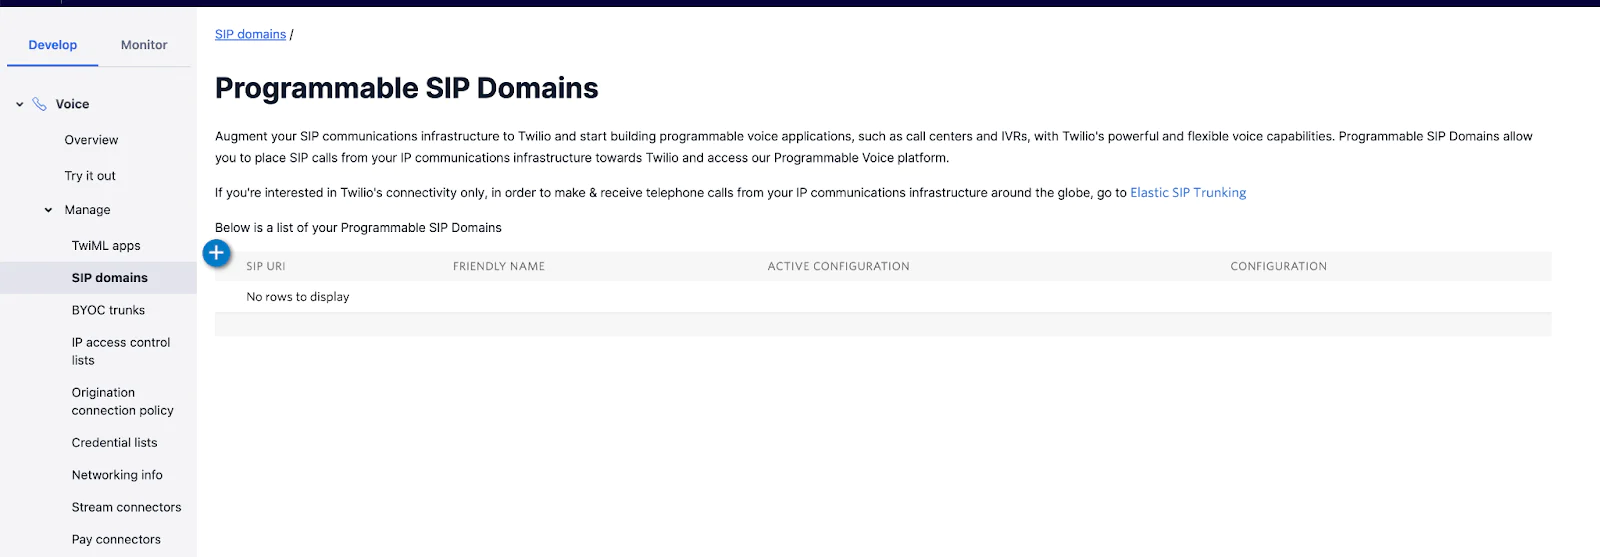 A screenshot of the Programmable SIP Domains page in the Twilio Console.
